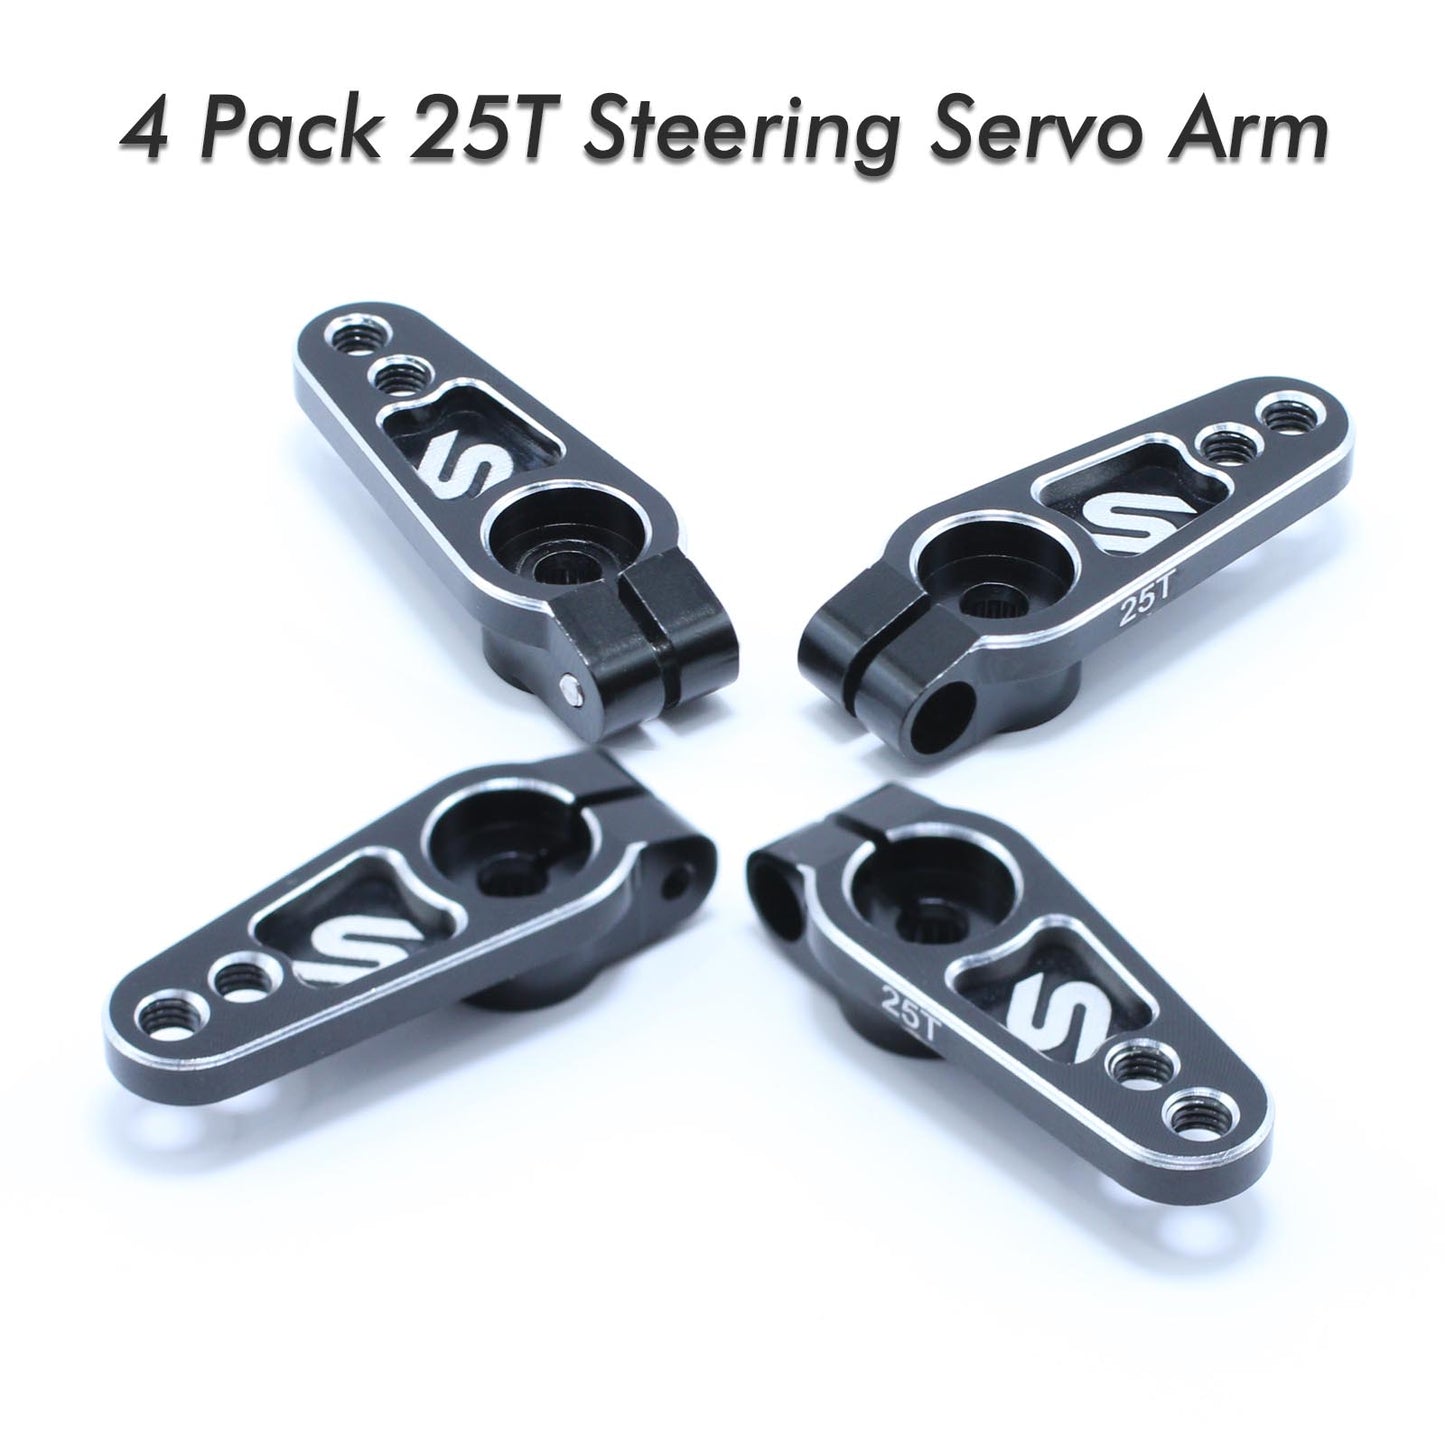 Sincecam 25T Servo Horns Servo Arms,Hard Metal Aluminum,M3 Threads Steering Arm for 1/8 1/10 1/12 Scales RC Models -4 Pack